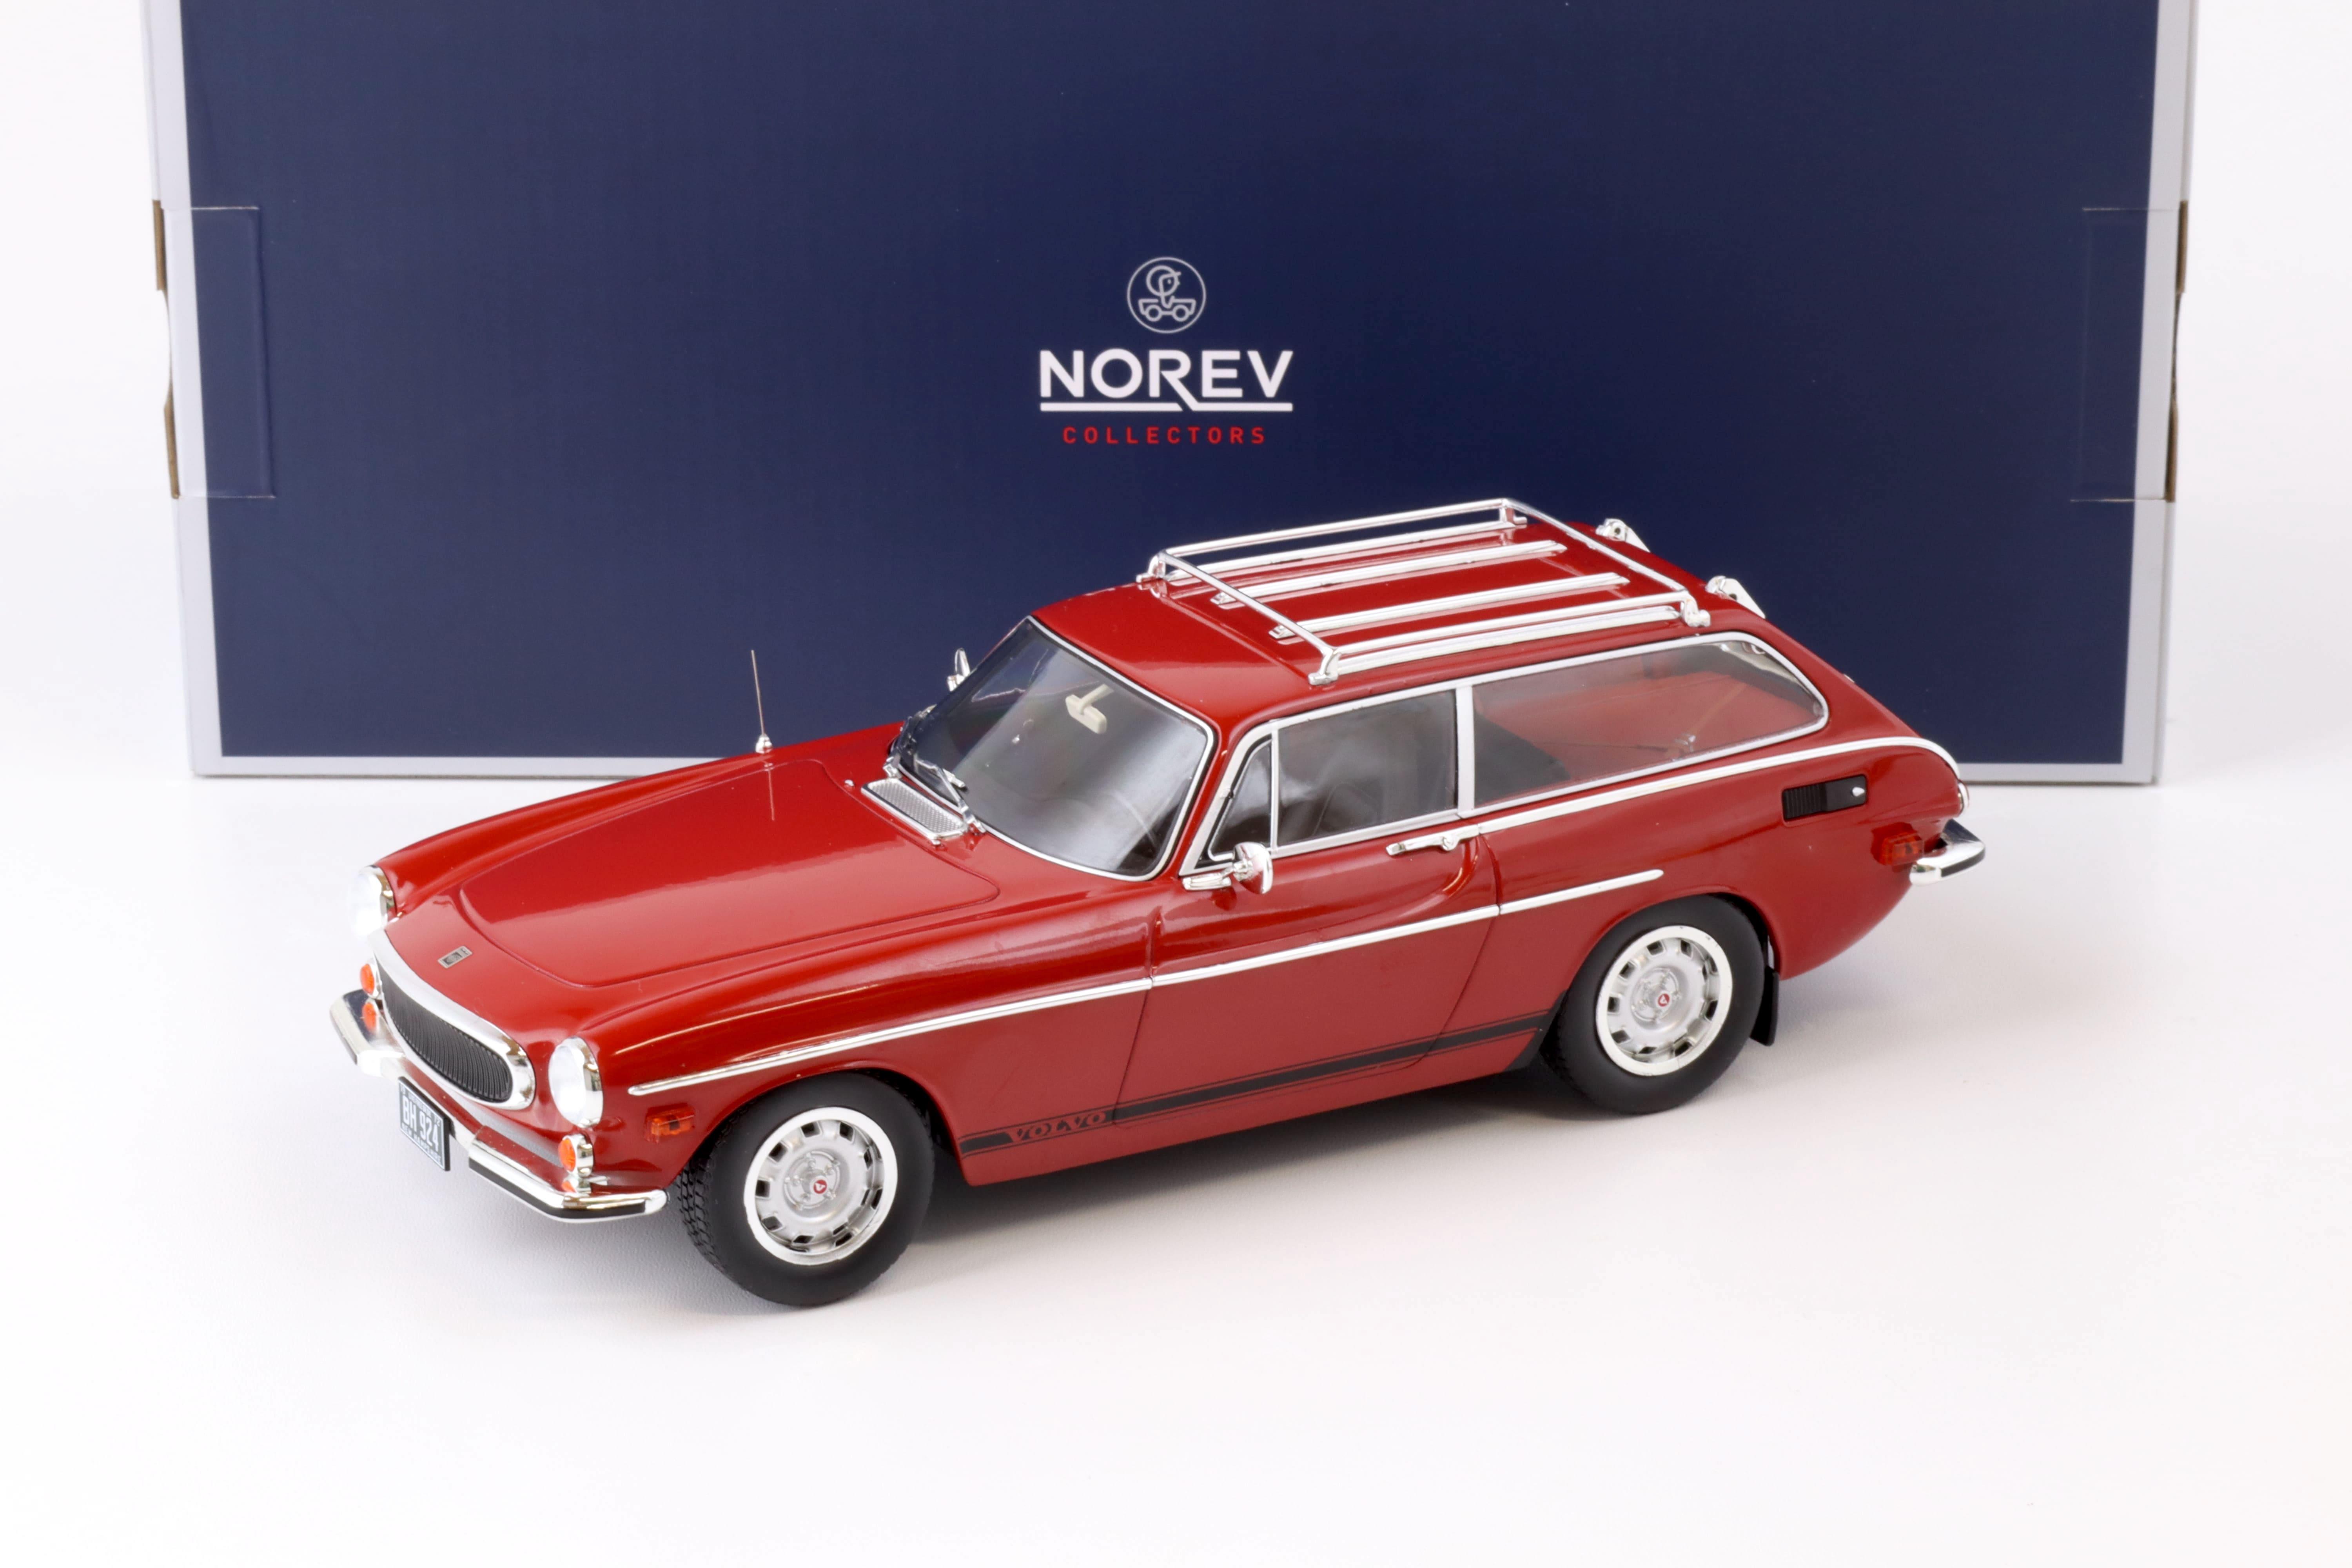 1:18 Norev Volvo 1800 ES US Version 1972 red with lower side stripes